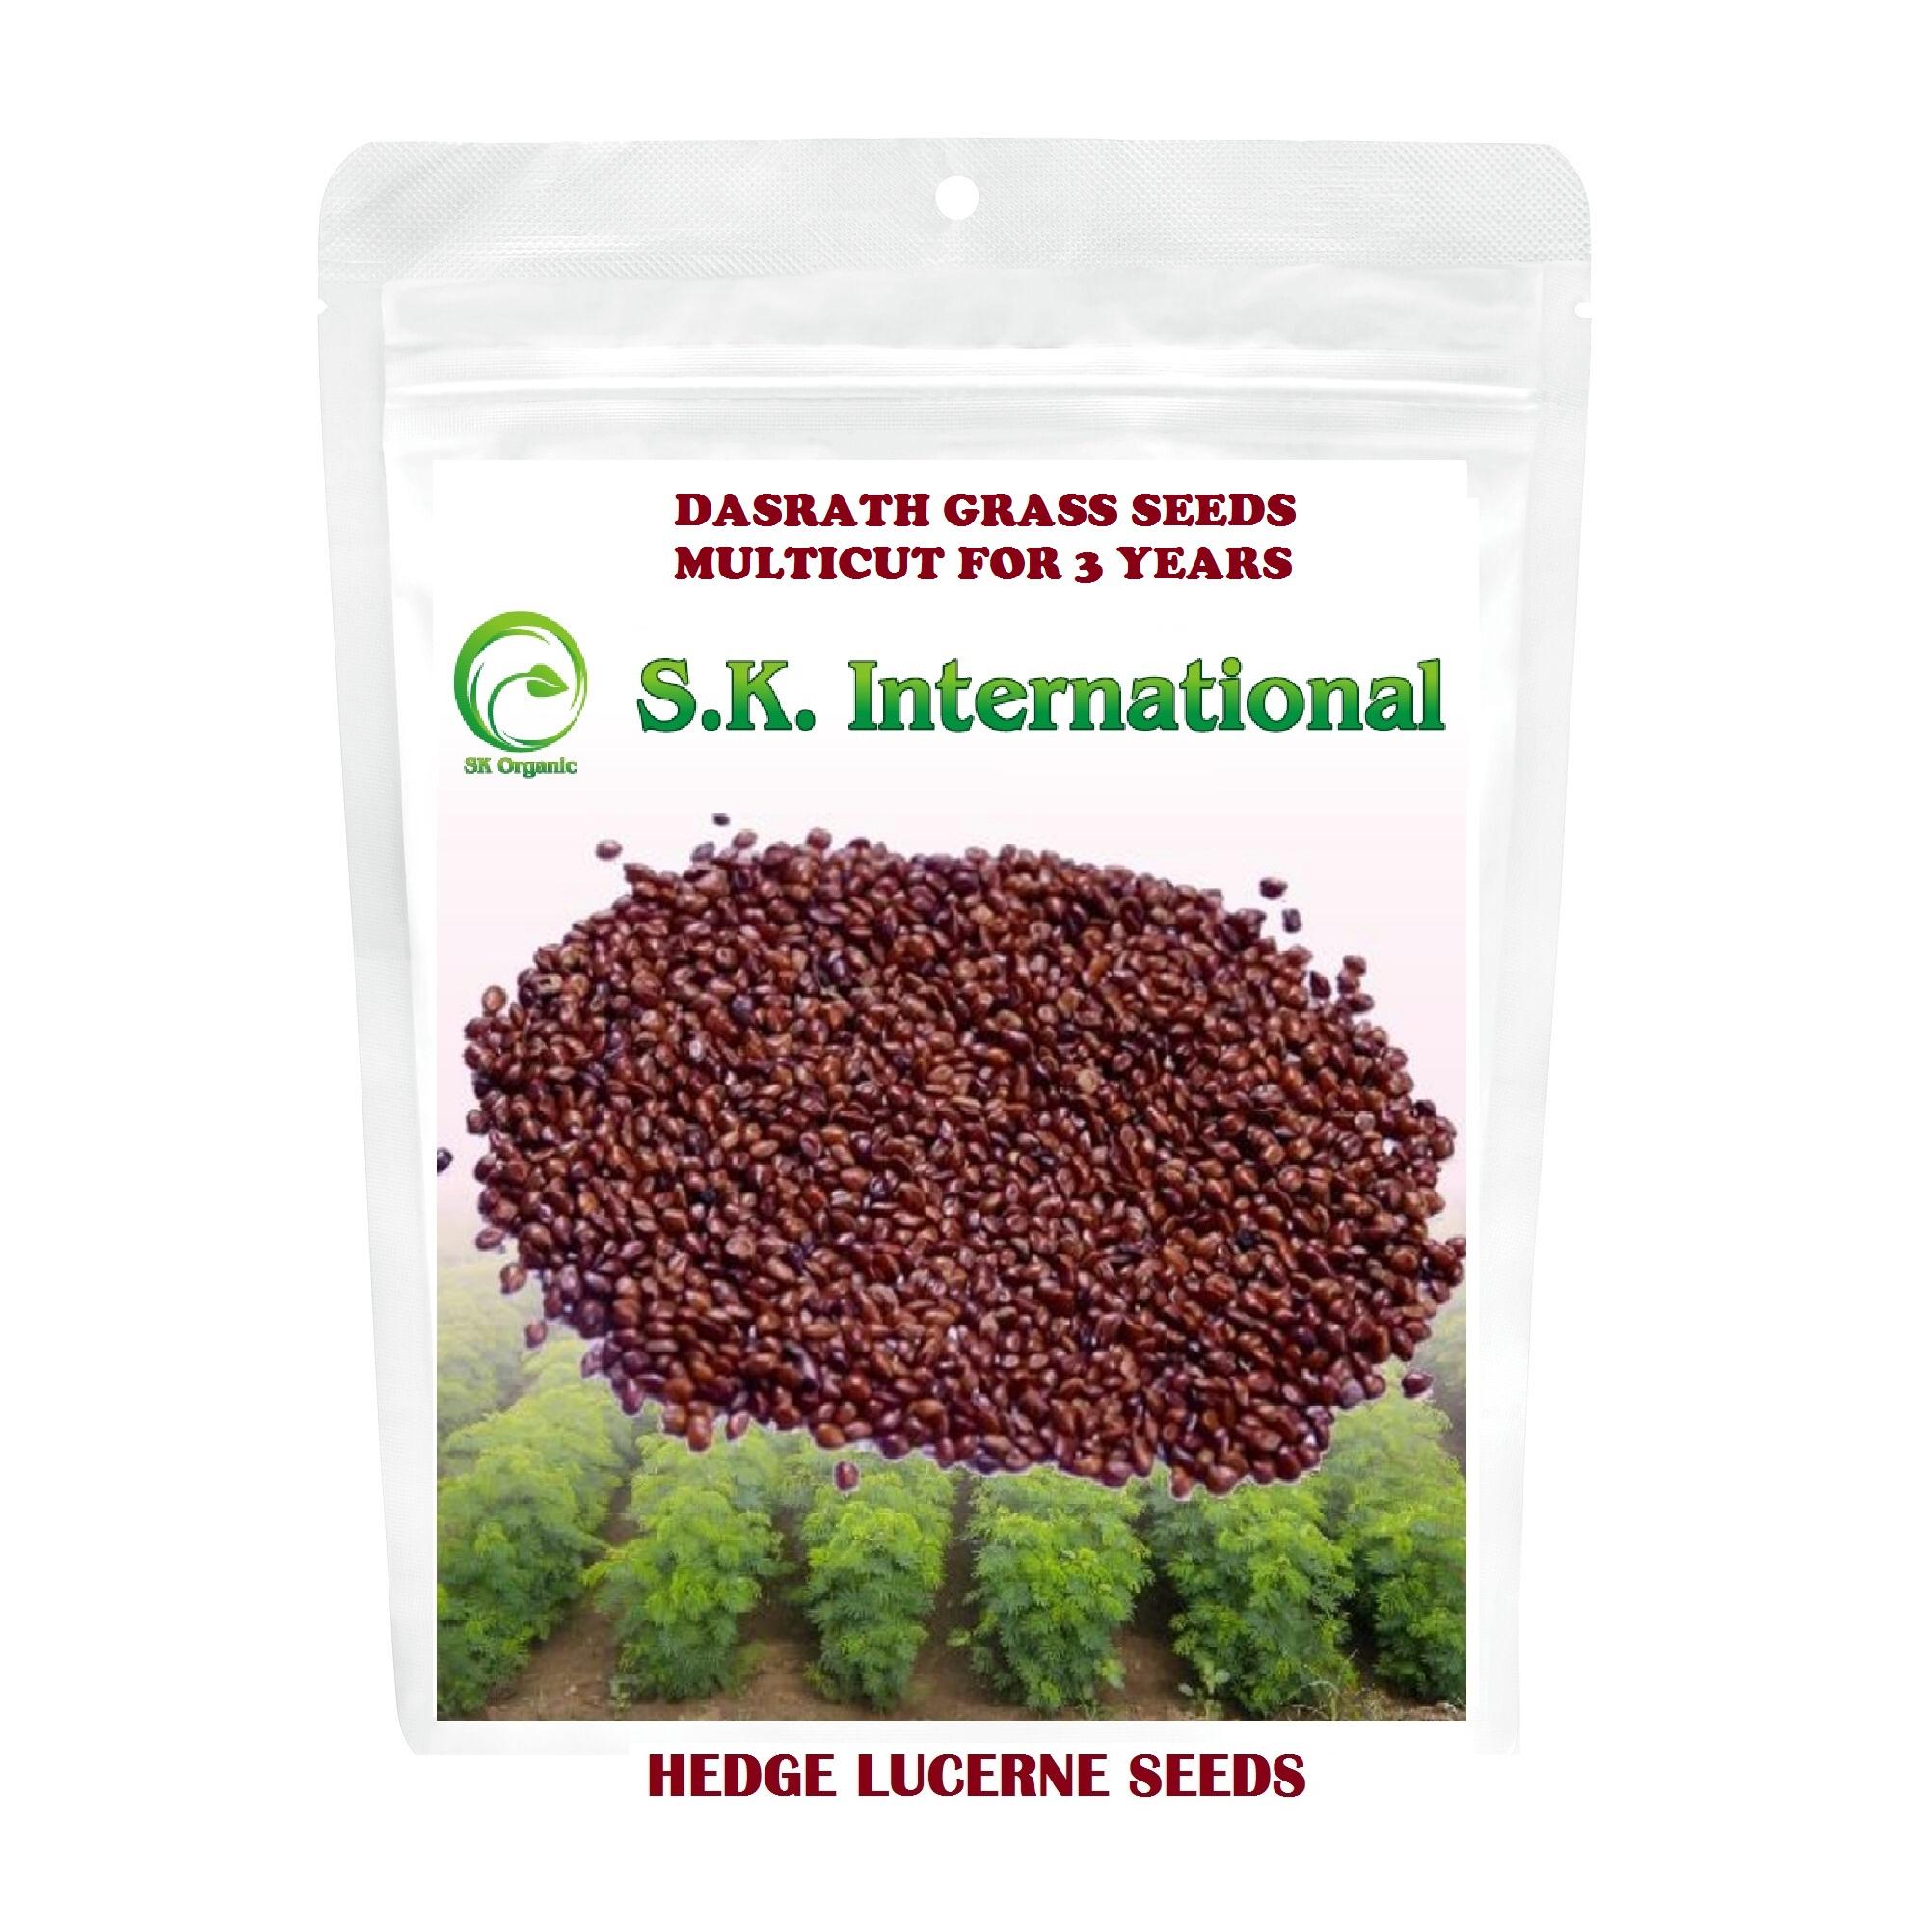 SK ORGANIC Dasrath Grass Seeds ( Hedge Lurcerne Seeds) for 3 years multicut thumbnail